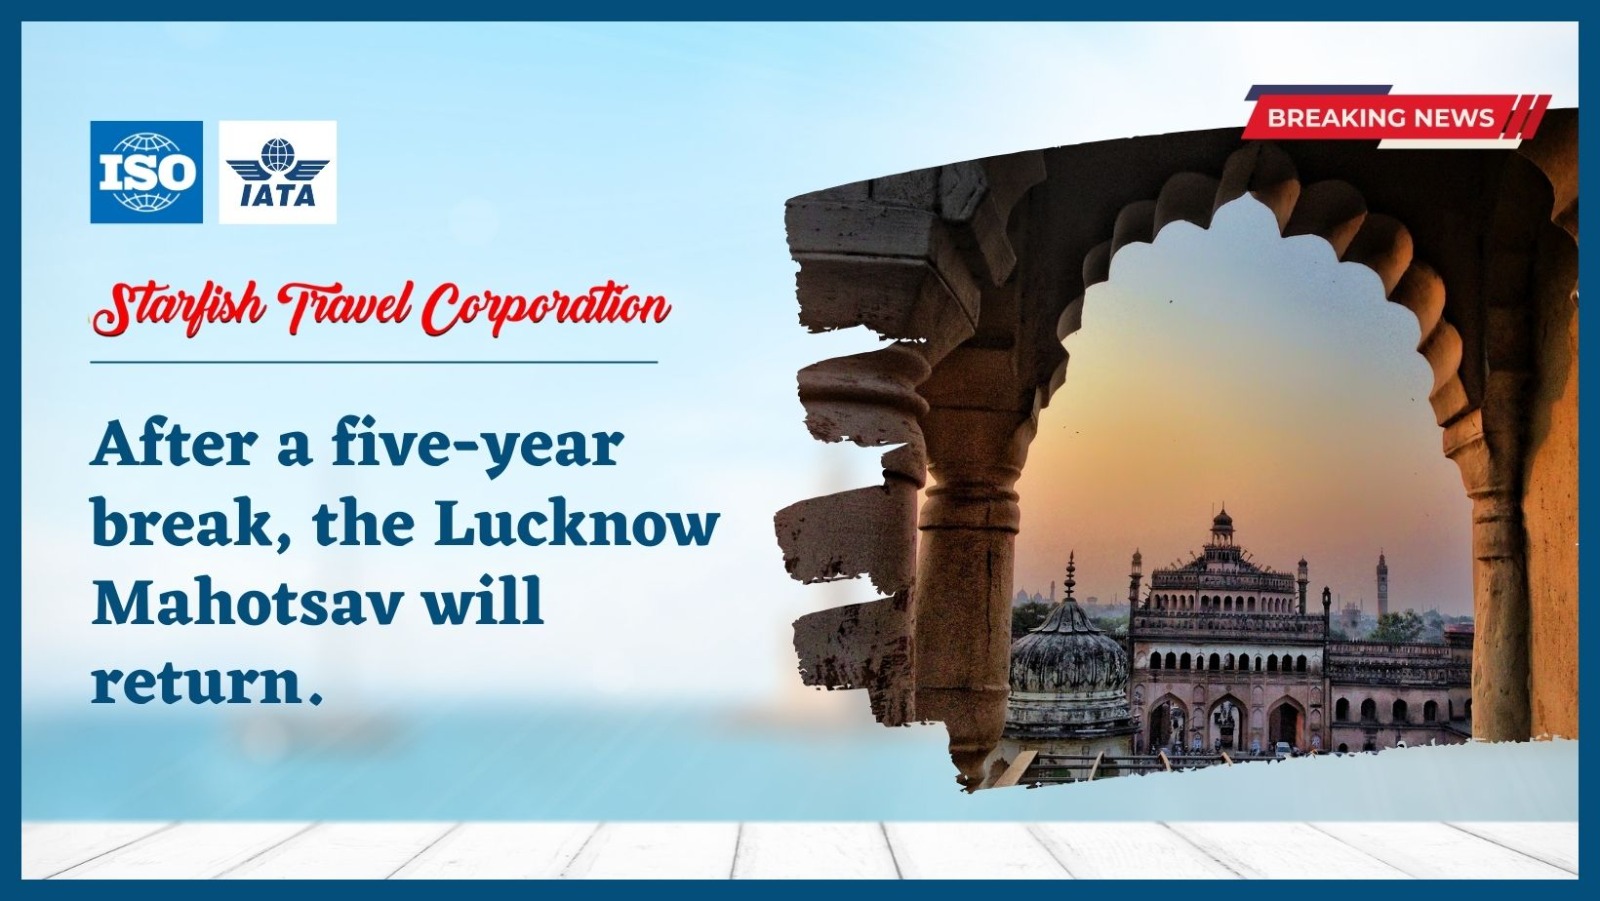 After a five-year break, the Lucknow Mahotsav will return.